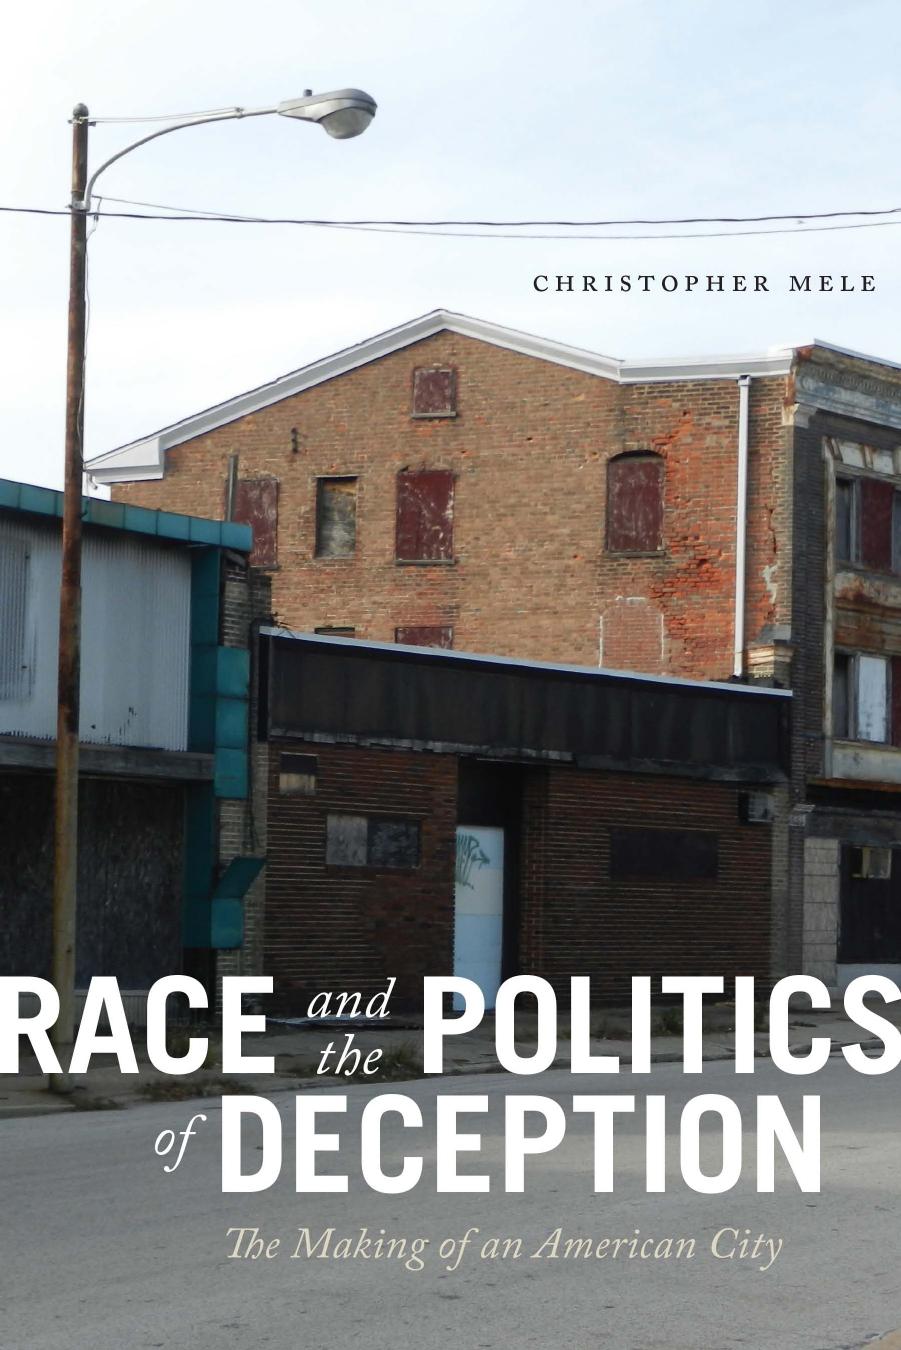 Race and the Politics of Deception: The Making of an American City by Christopher Mele